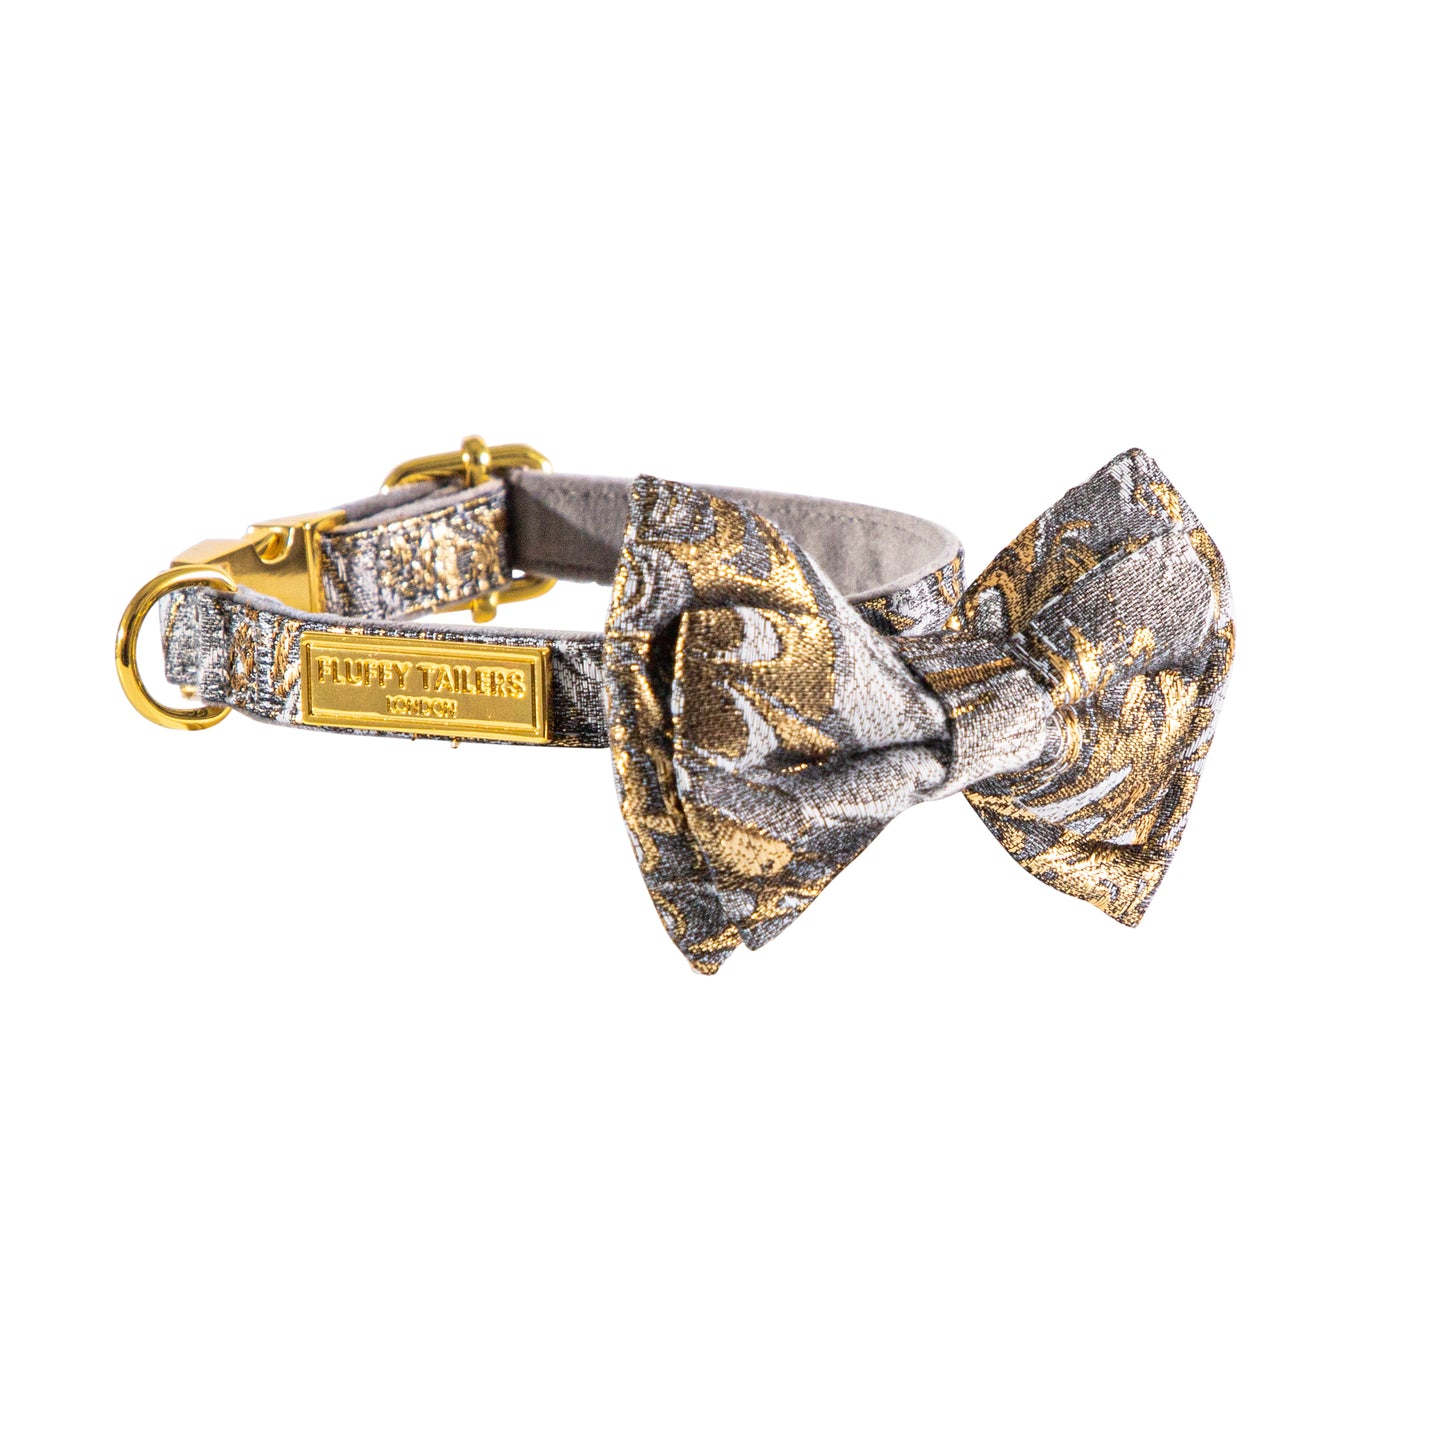 Luxury Occasion Collection- Dog Harness, Collar, Bow, Leash and Poop Bag Holder